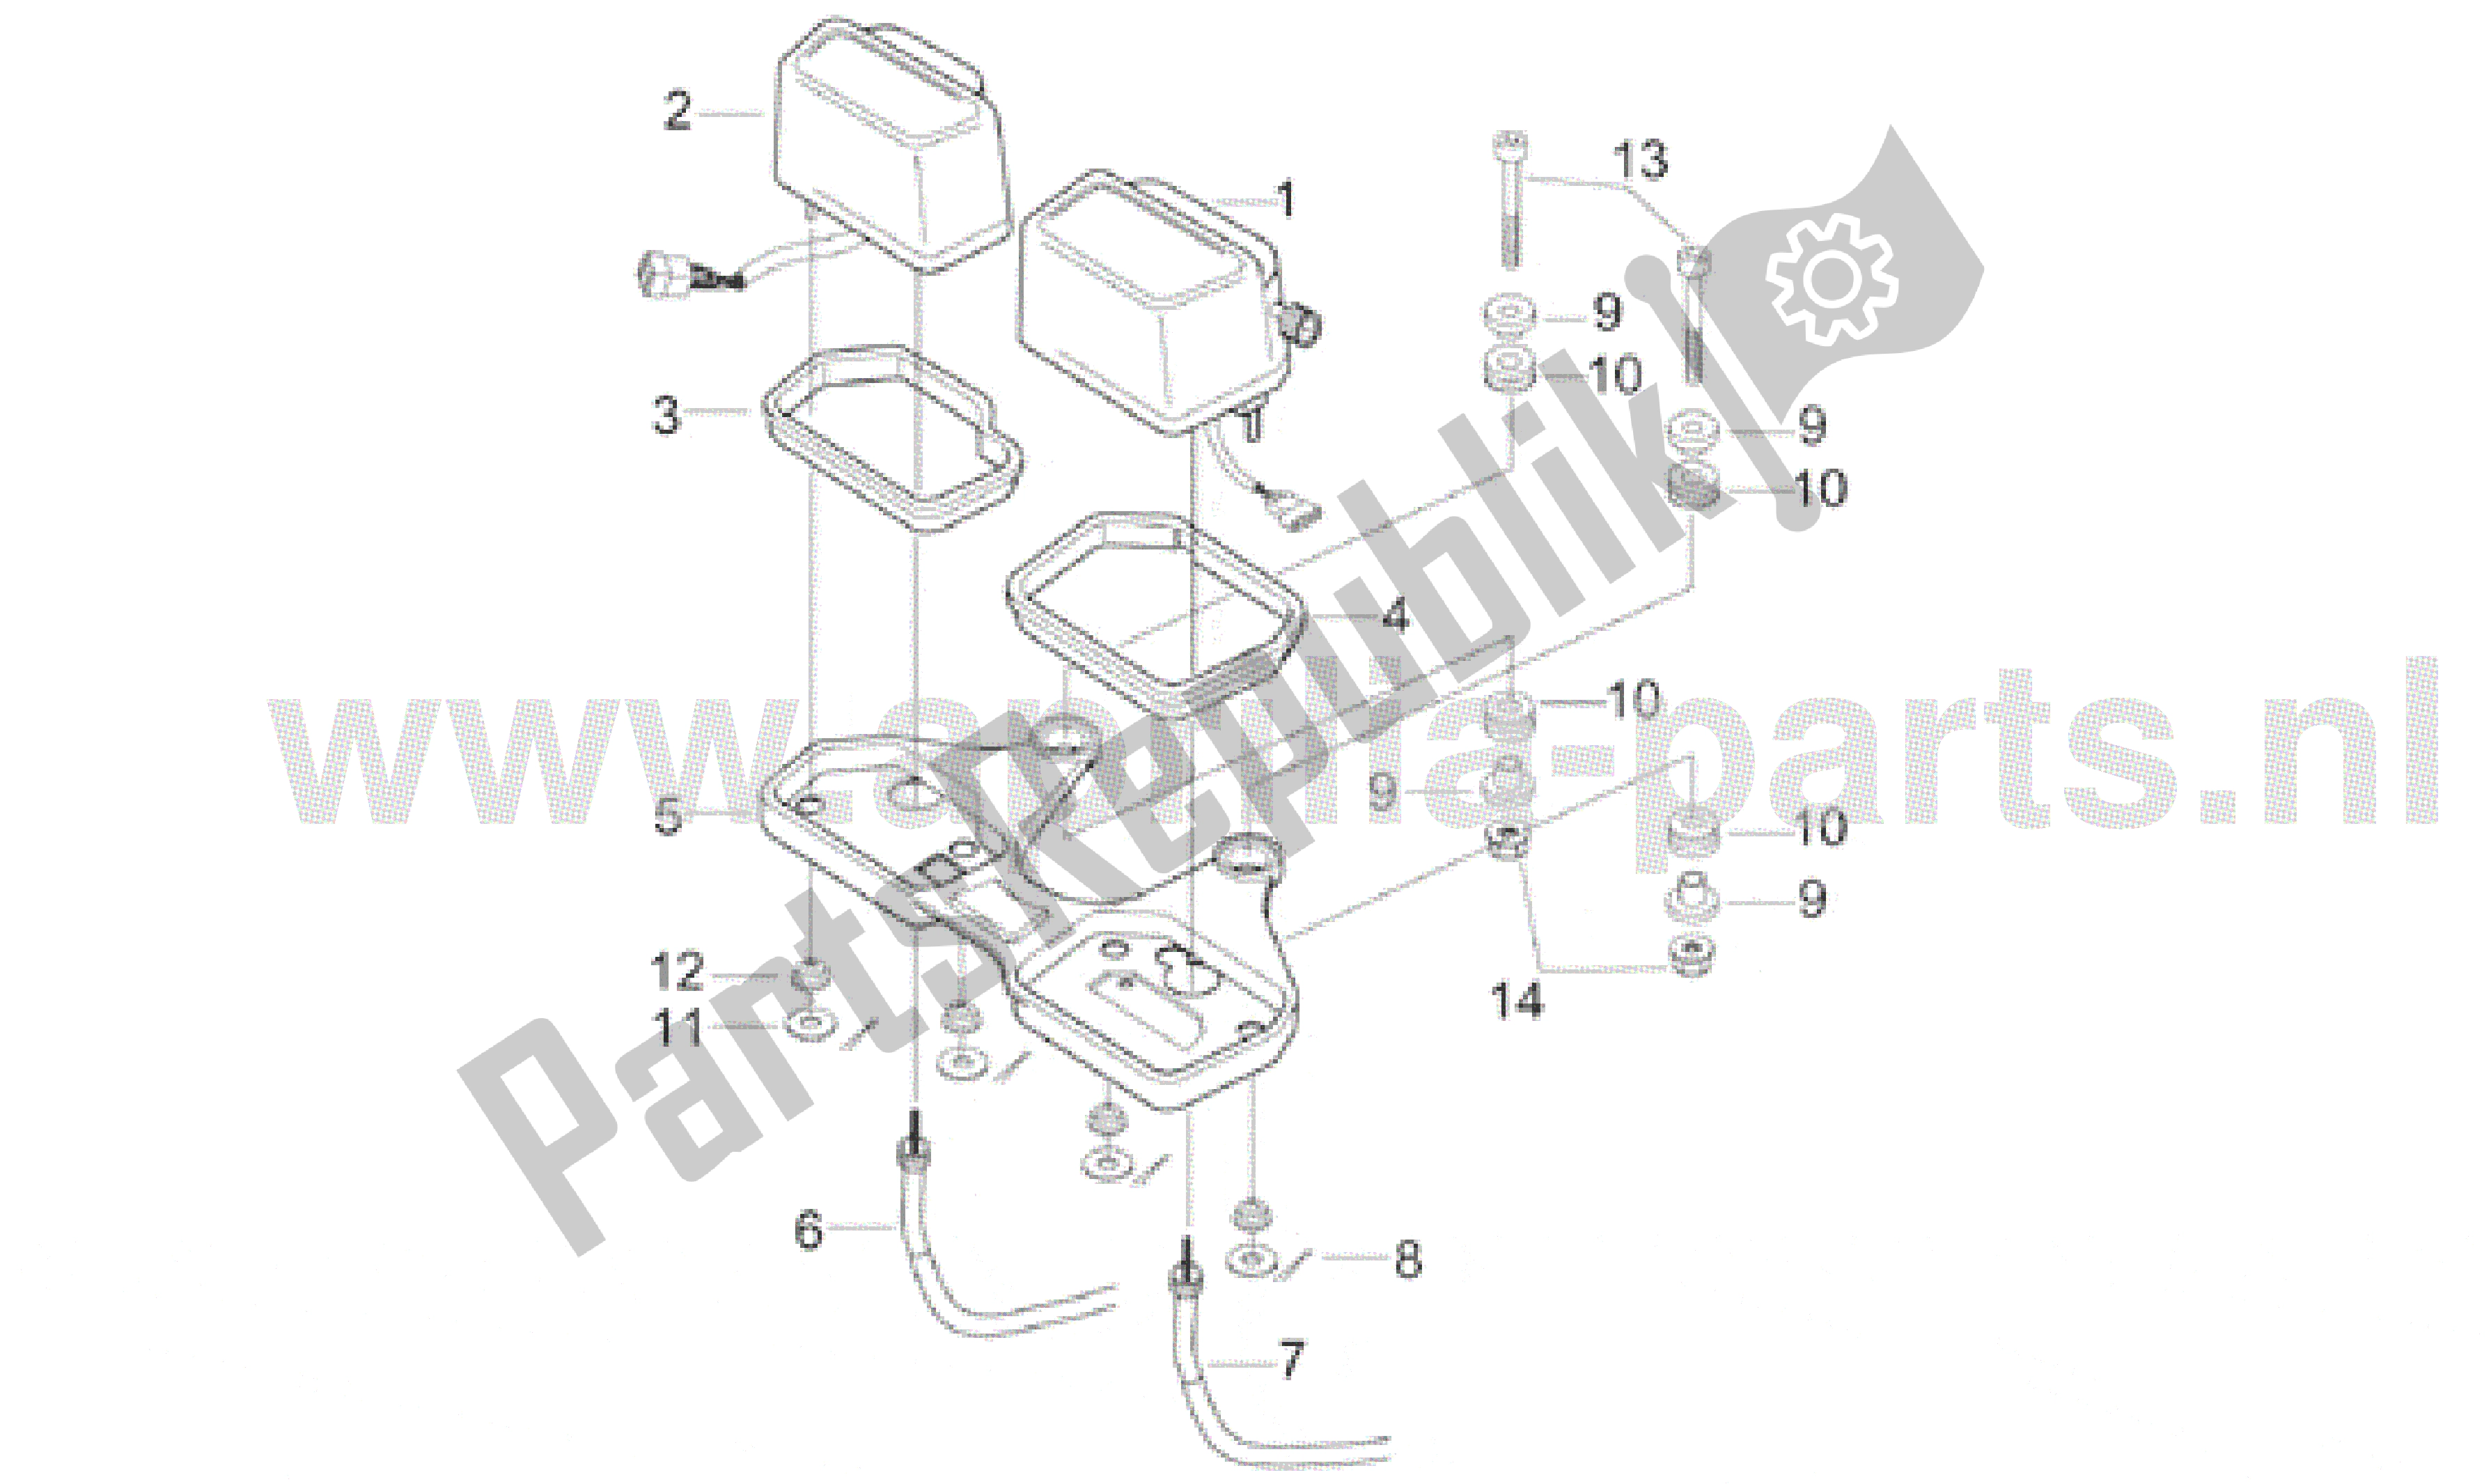 All parts for the Dashboard of the Aprilia RX 50 1995 - 2000